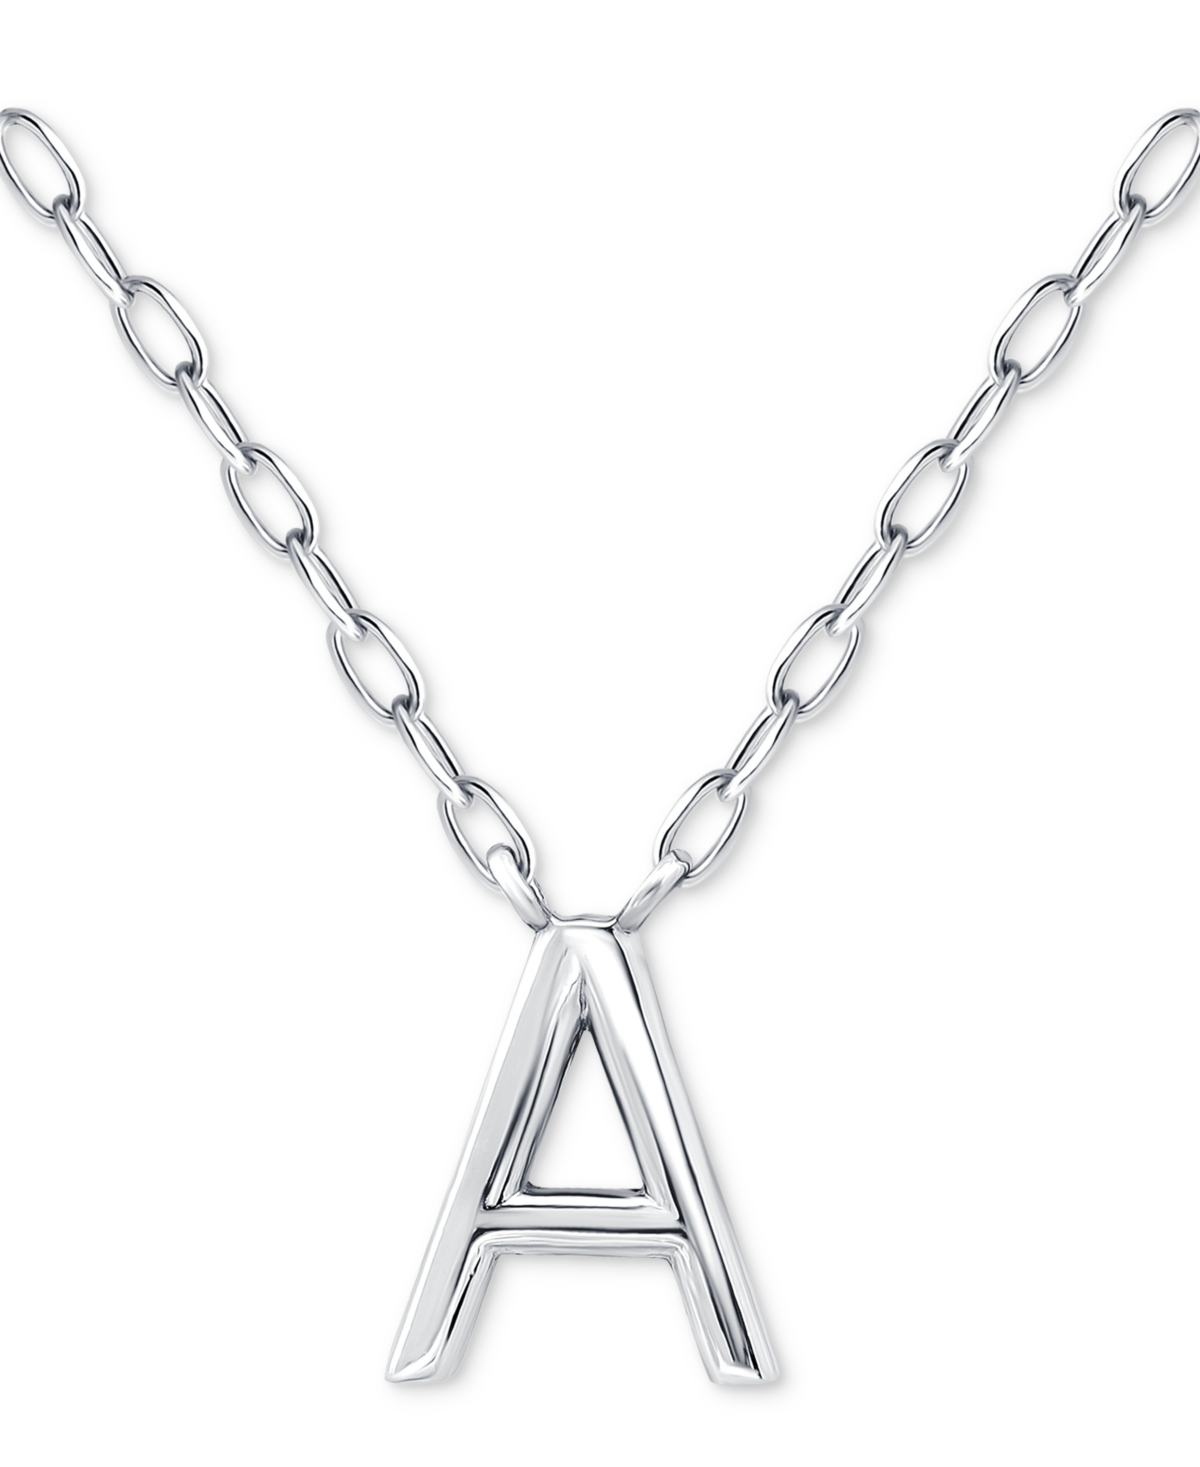 Initial A Pendant Necklace in Sterling Silver, 16" + 2" extender, Created for Macy's - Silver